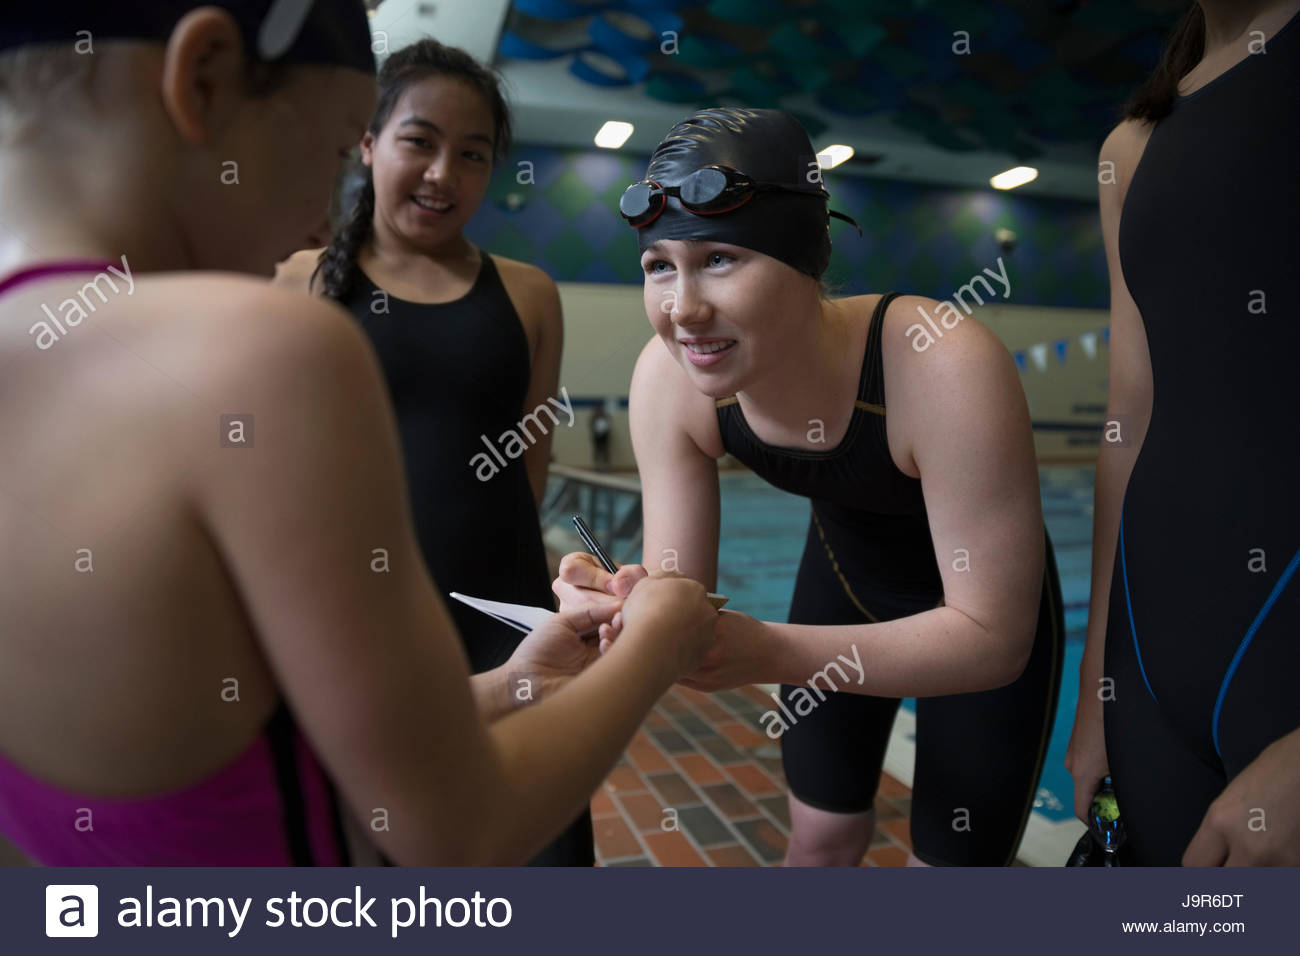 Female swimmer signing autograph for girl at swimming pool Stock Photo